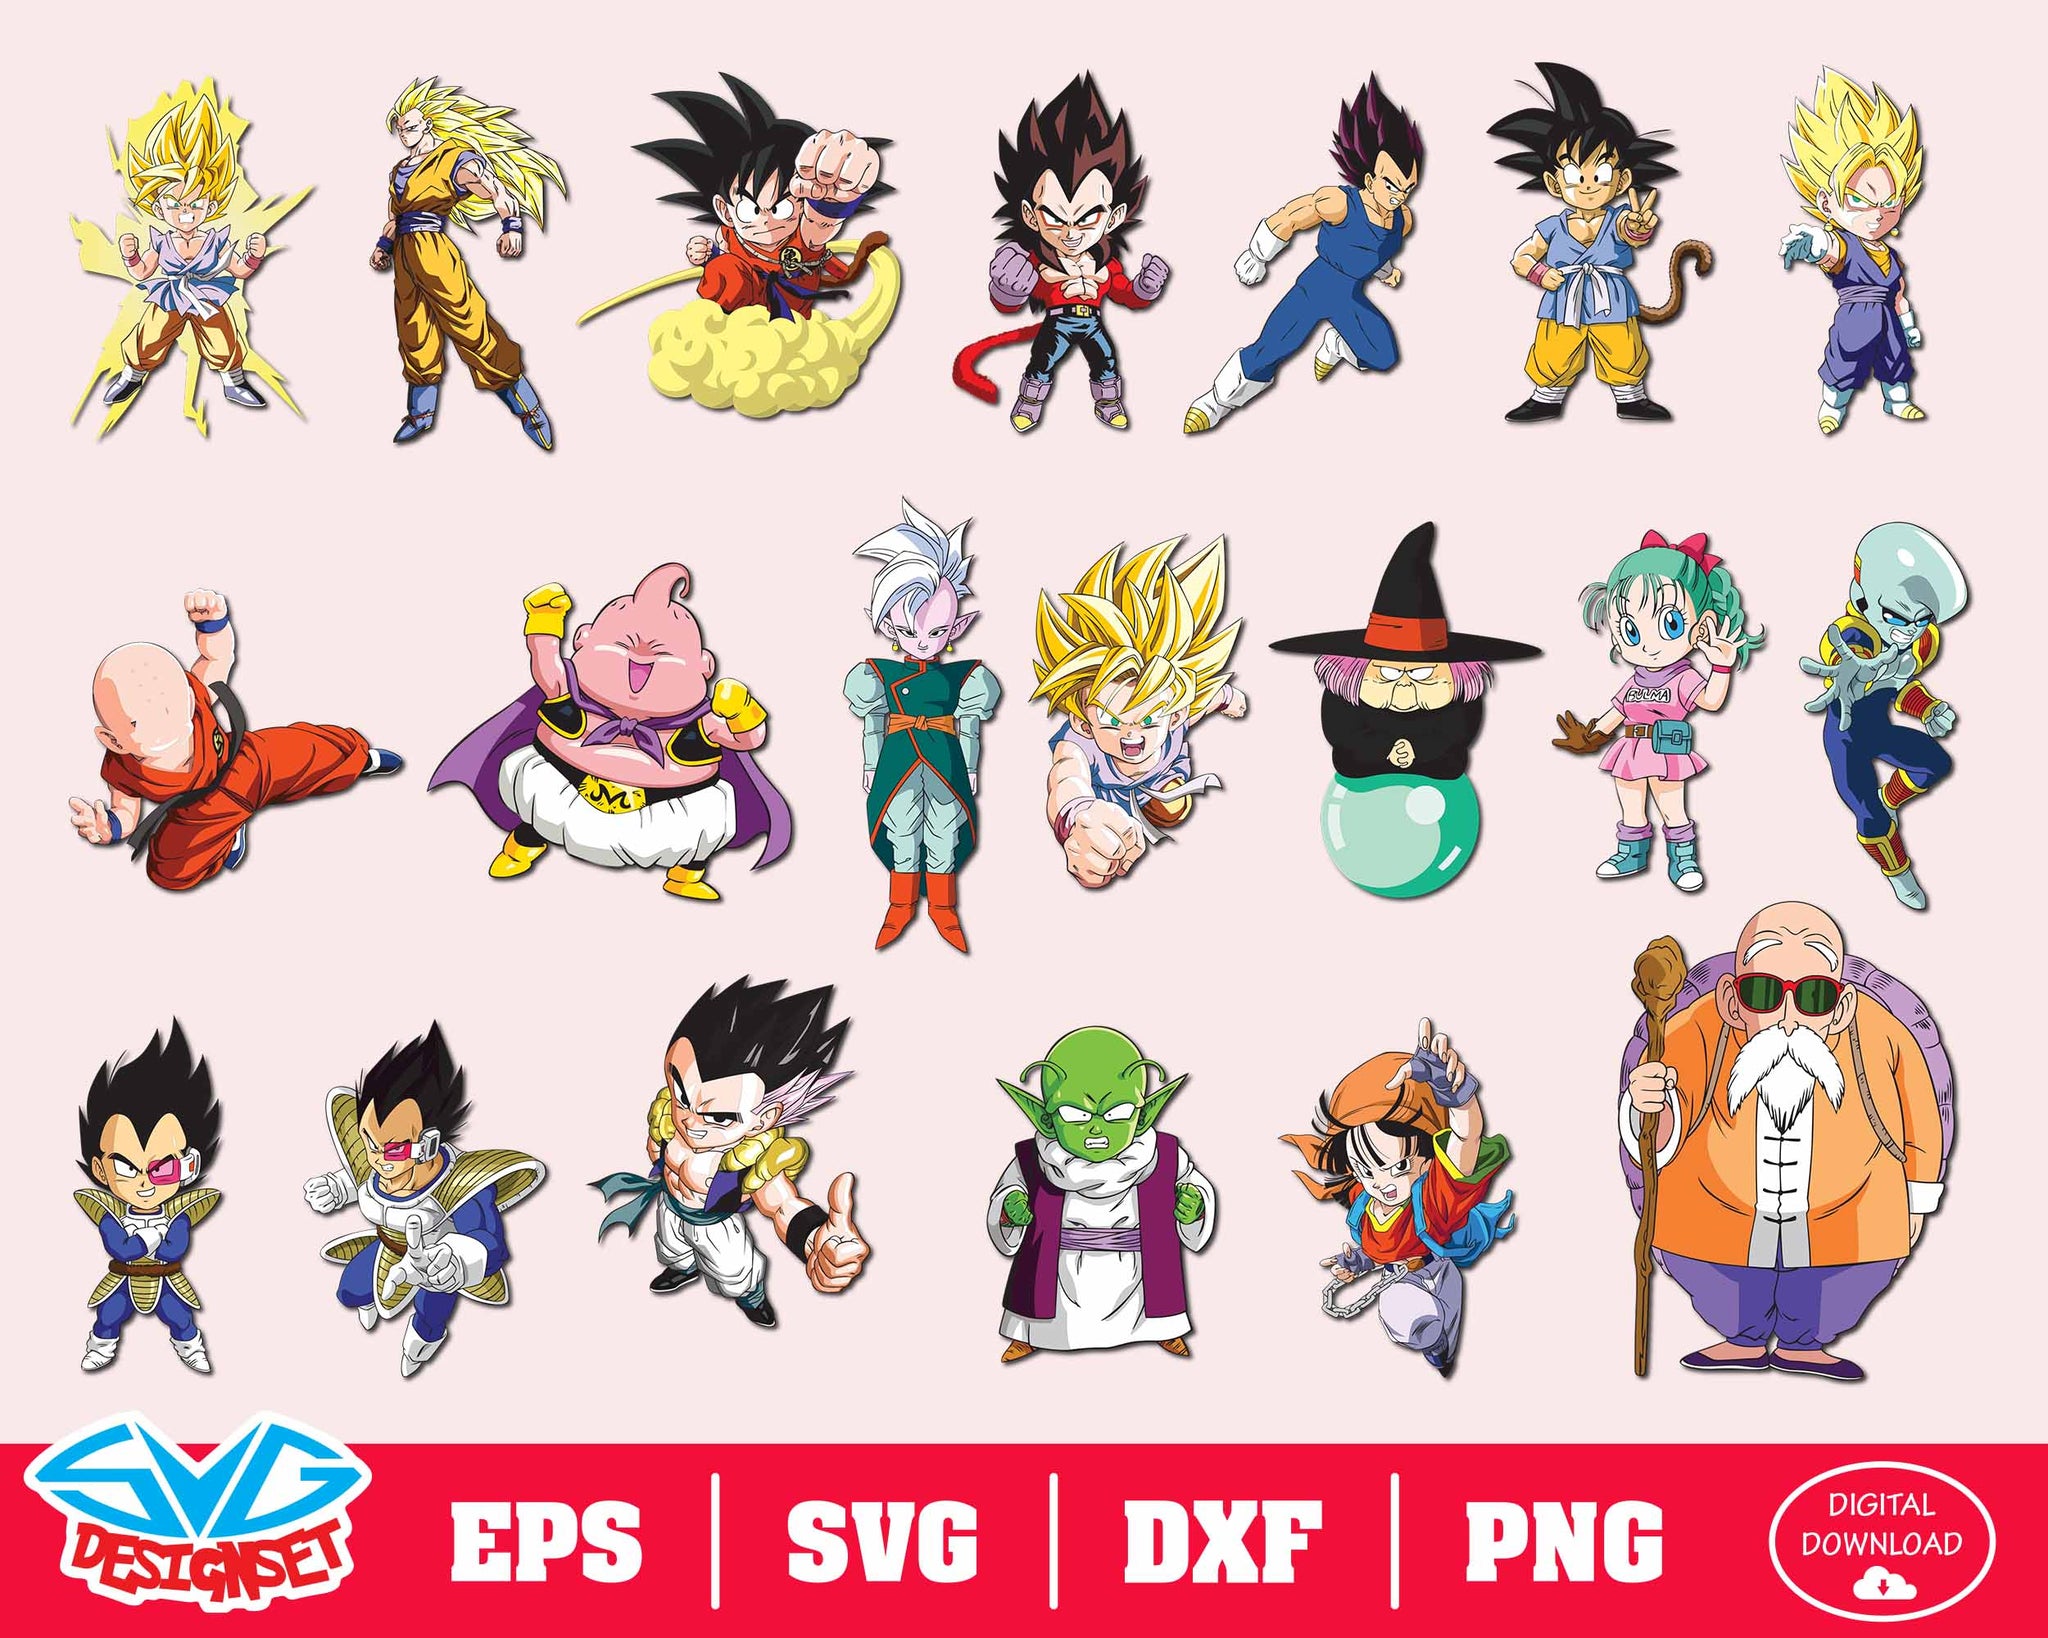 Dragon Ball Z Svg, Dxf, Eps, Png, Clipart, Silhouette and Cutfiles #2 - SVGDesignSets